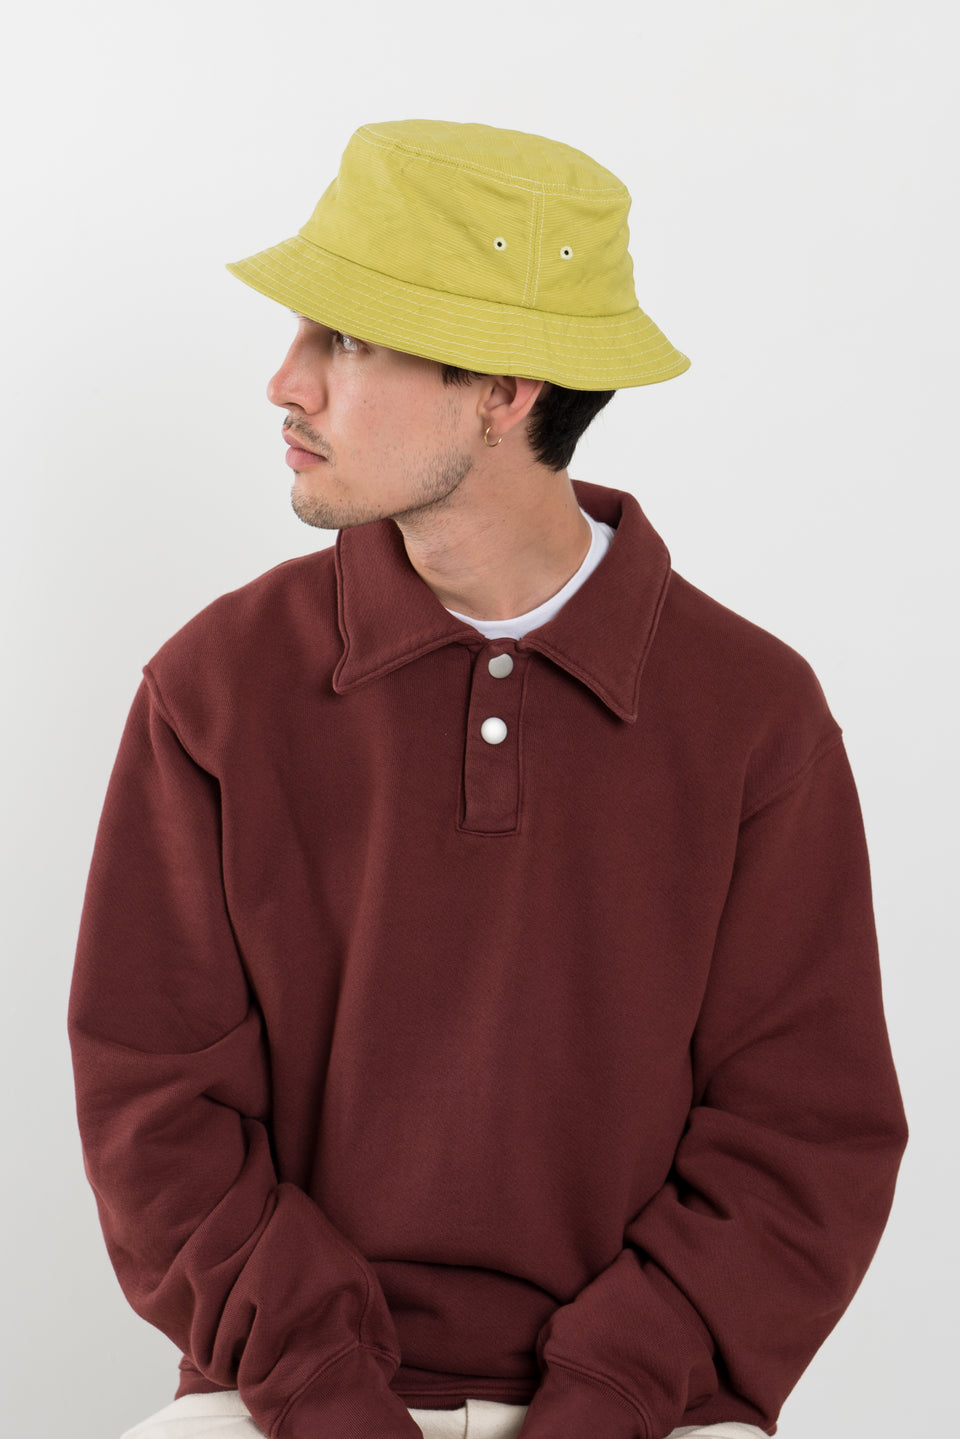 Paa US SS22 Bucket Hat One Grainstop Golden Lime Calculus Victoria BC Canada